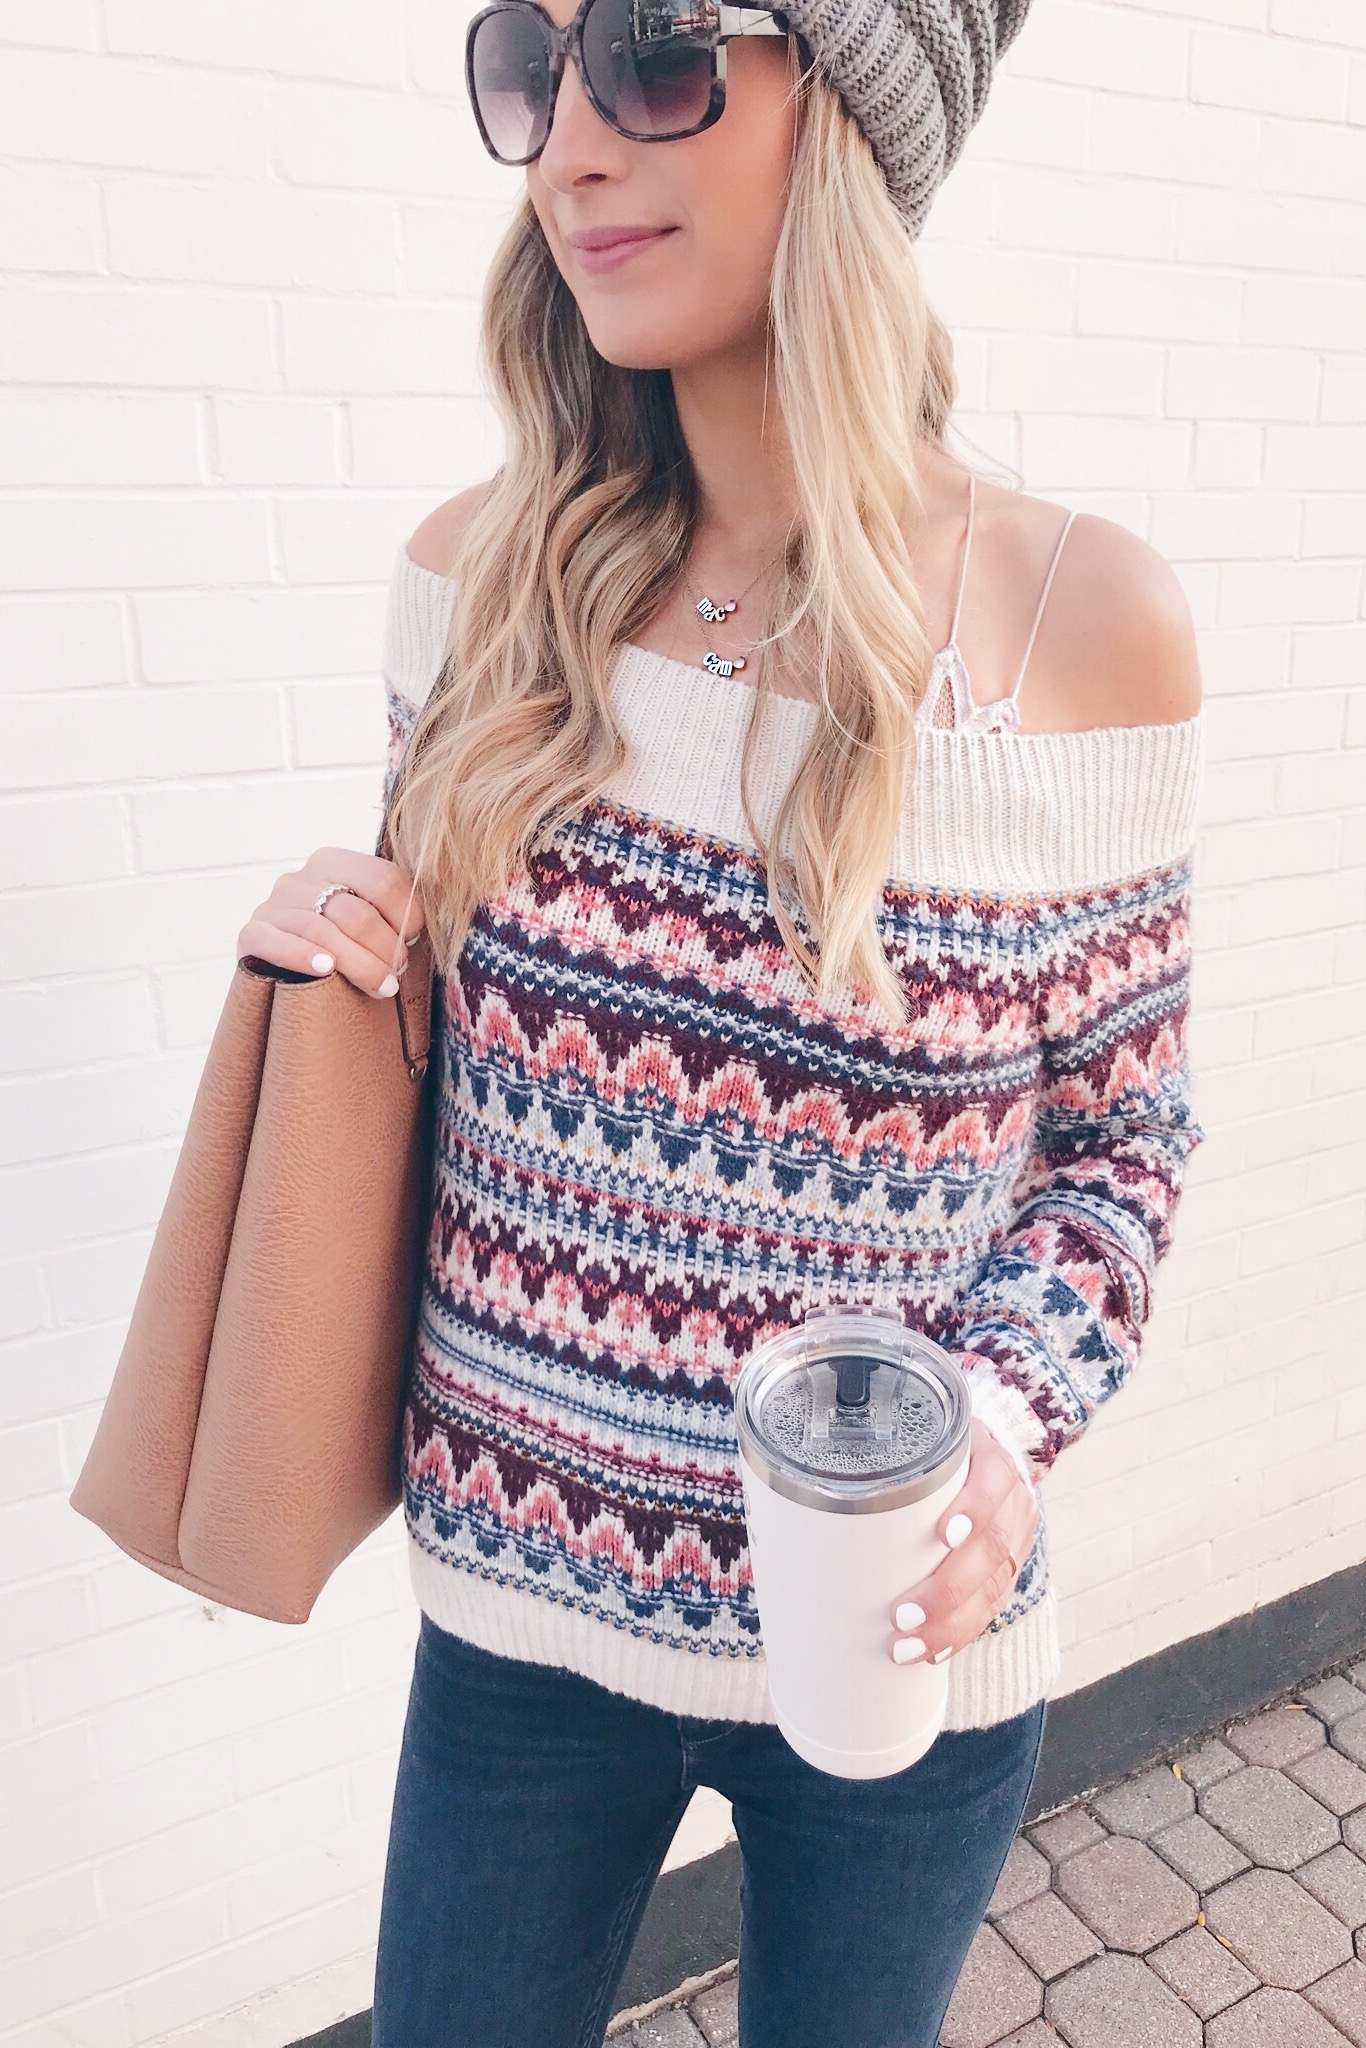 Pinks for Fall Outfit Ideas | Colorful Sweaters